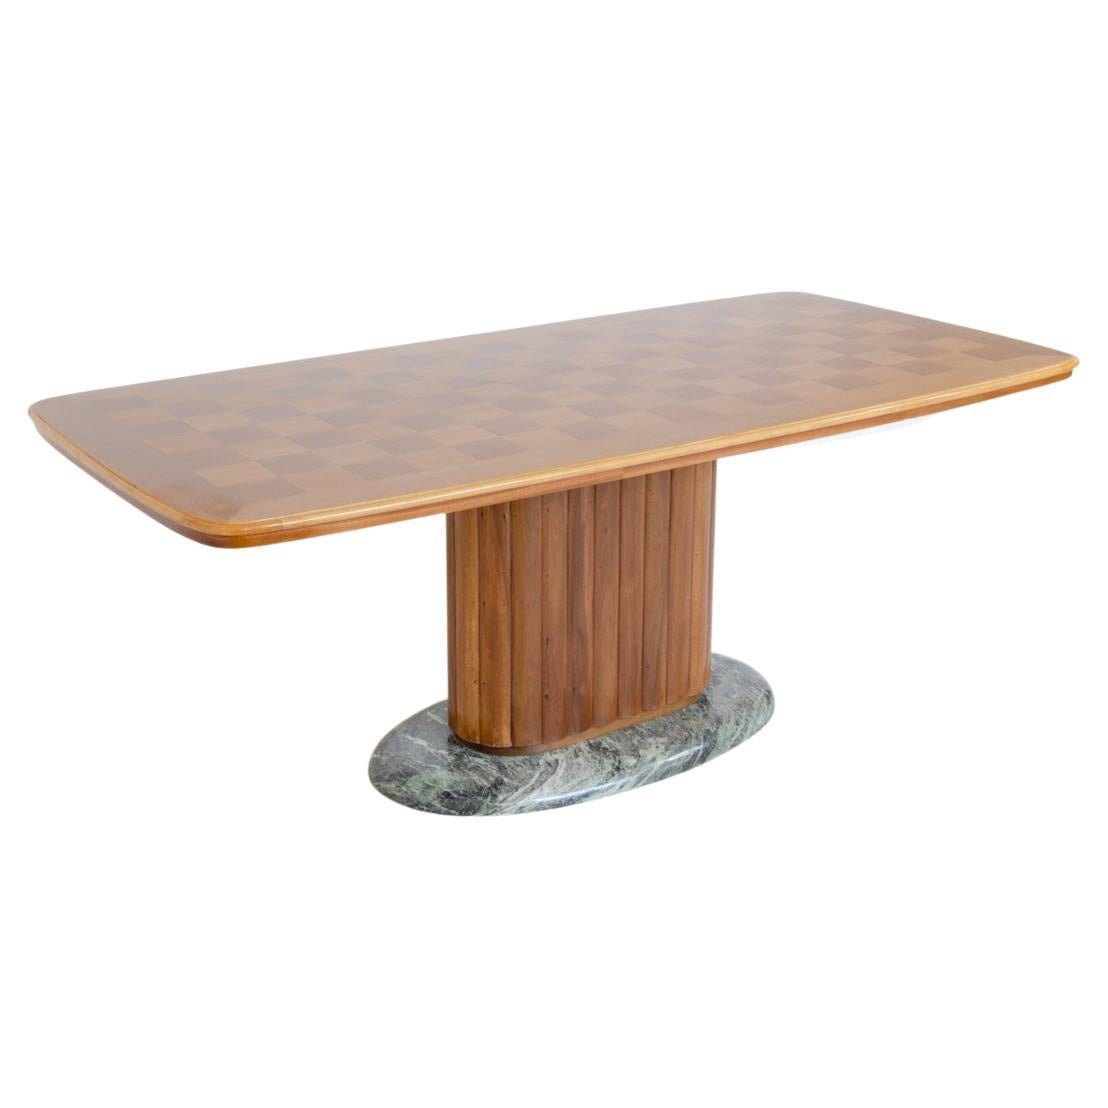 Vittorio Dassi 1940s Dining Table with a Very Nice Mahogany Oval Column Base For Sale